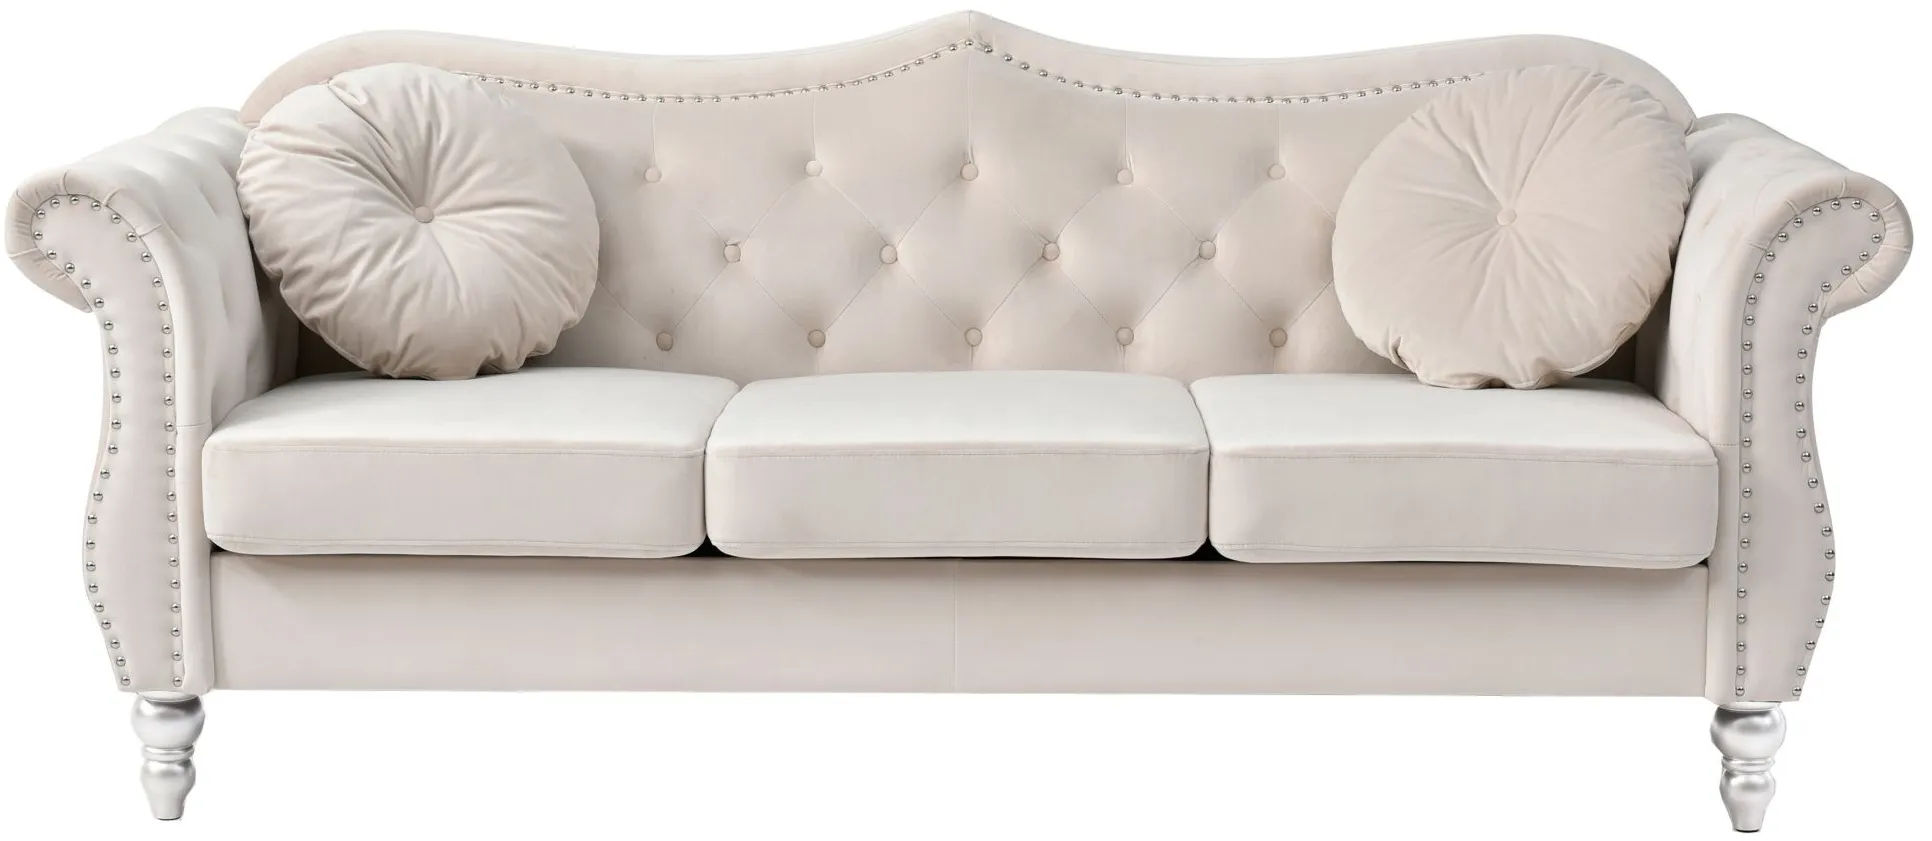 Hollywood Sofa in Ivory by Glory Furniture